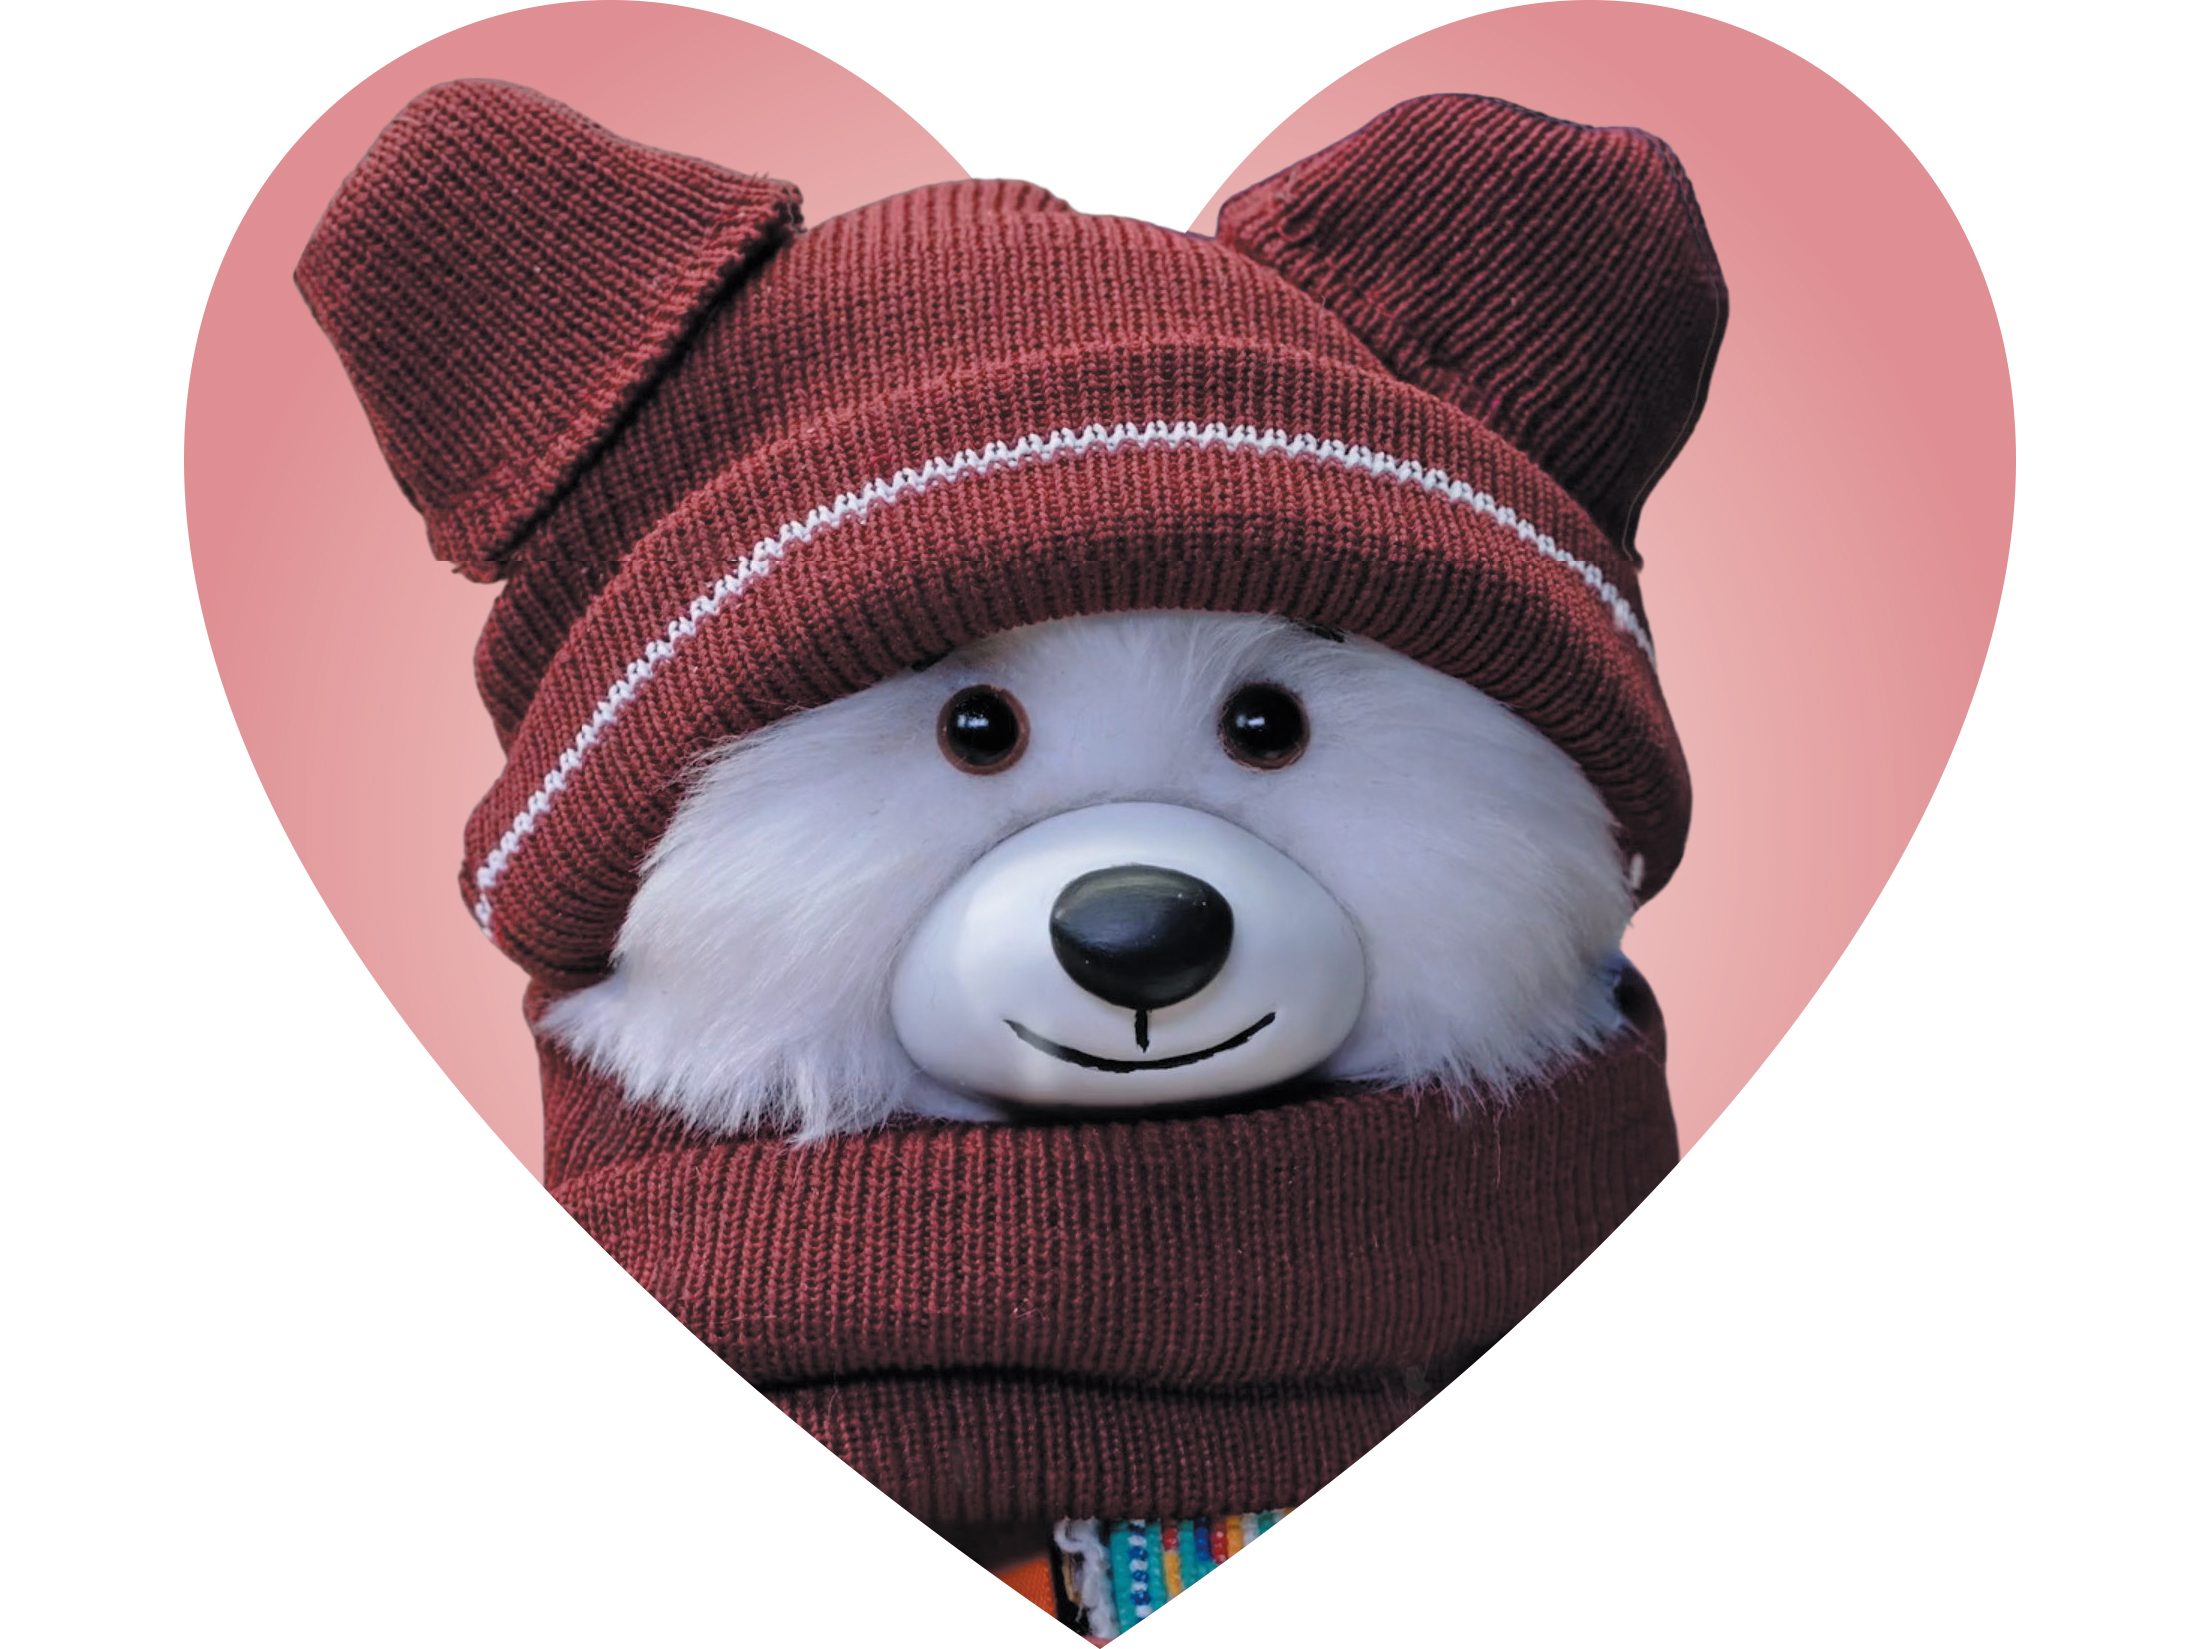 Photo of Spirit Bear wearing a maroon toque and matching scarf, framed within a pink heart